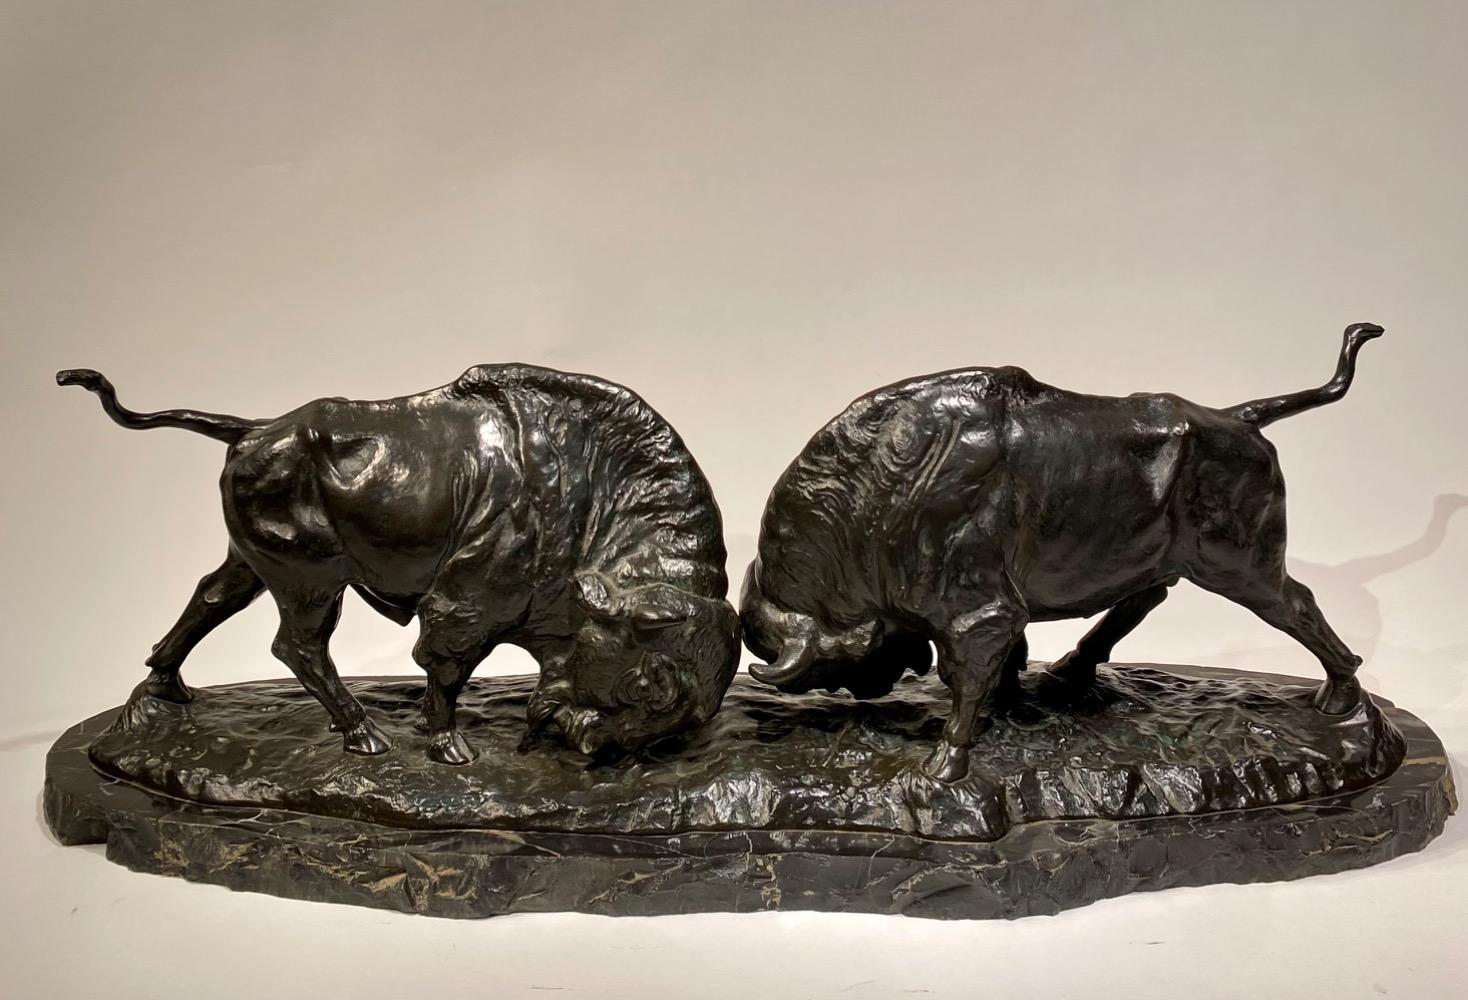 A LARGE BRONZE GROUP OF TWO BISON EARLY 20TH CENTURY, by FRANZ IFFLAND (1862-1935)